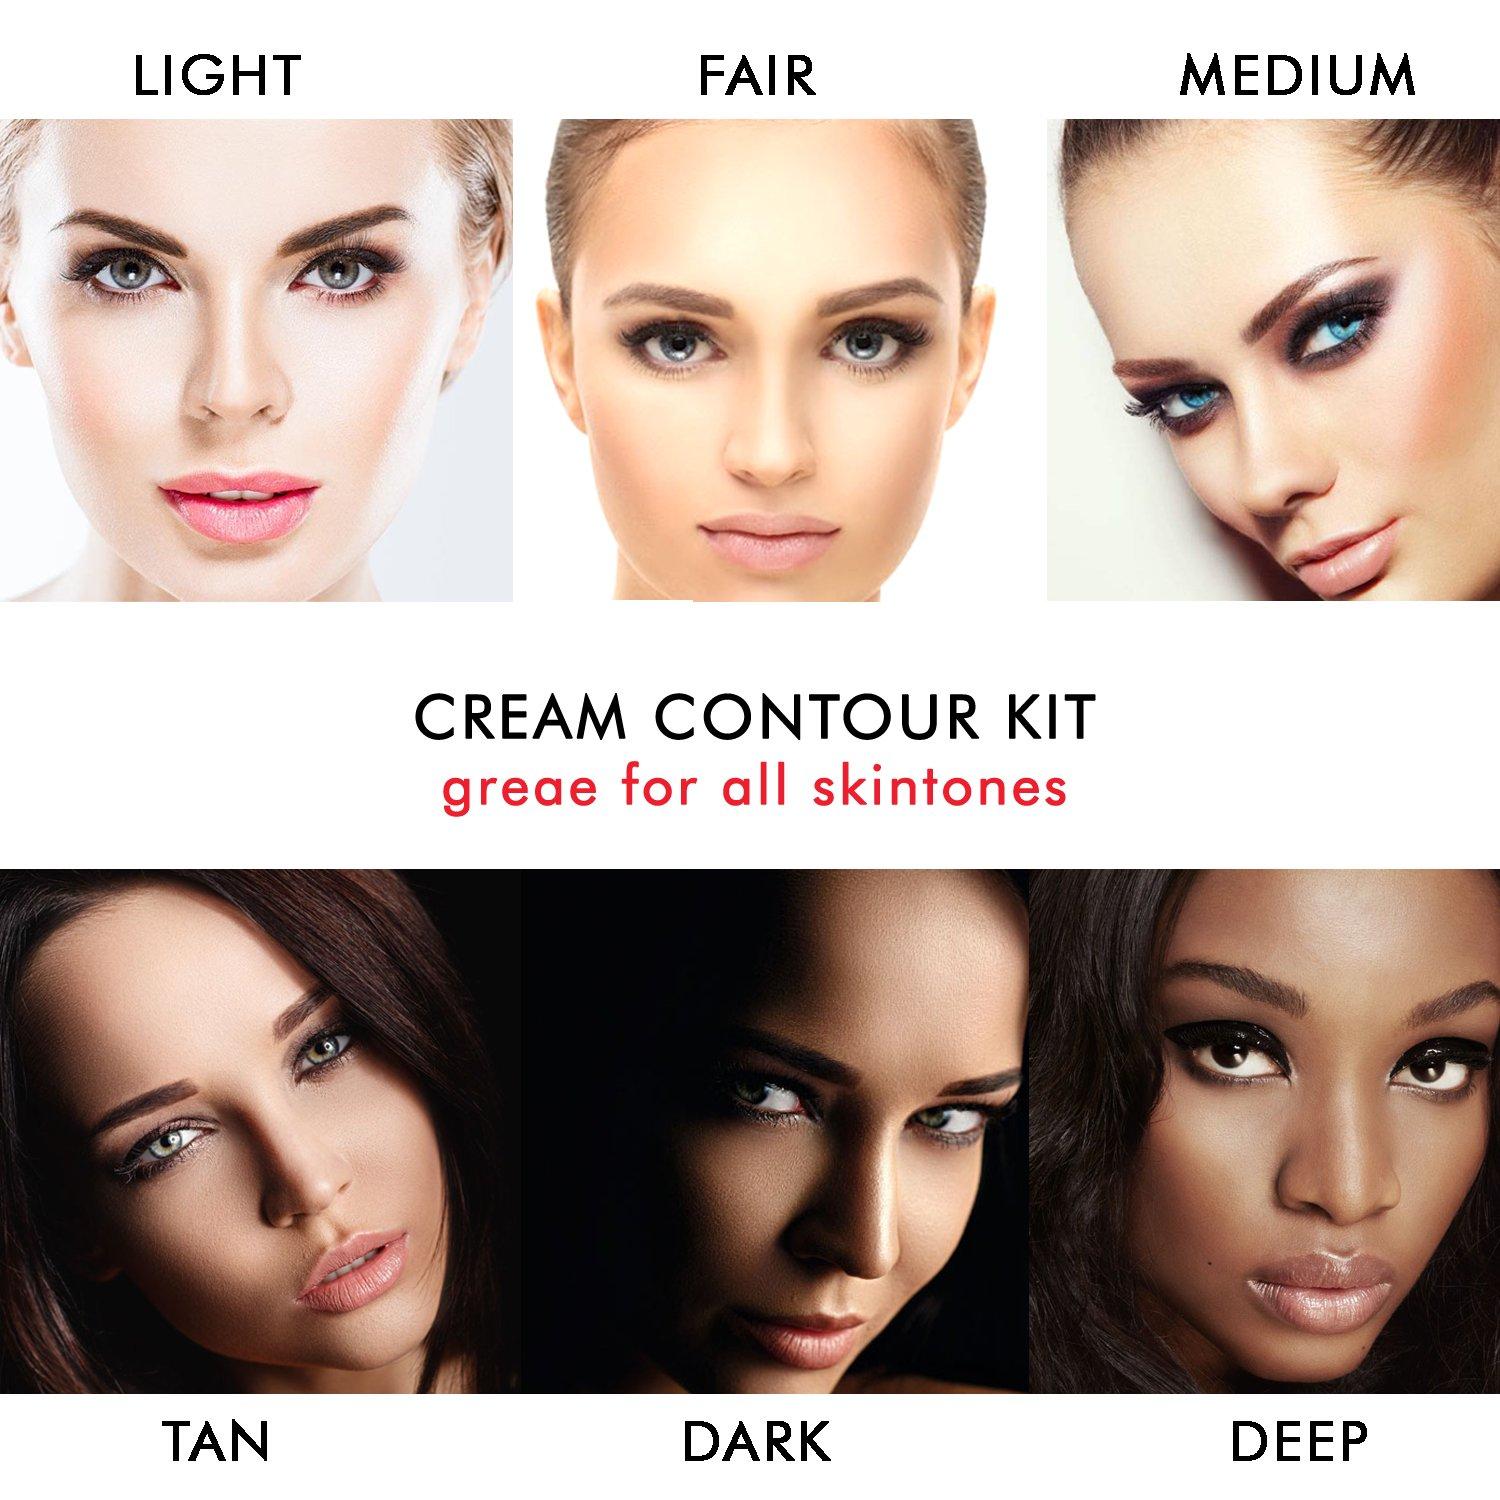  Youngfocus Cosmetics Cream Contour Best 8 Colors and  Highlighting Makeup Kit - Contouring Foundation/Concealer Palette - Vegan &  Cruelty Free - Step-by-Step Instructions Included : Beauty & Personal Care